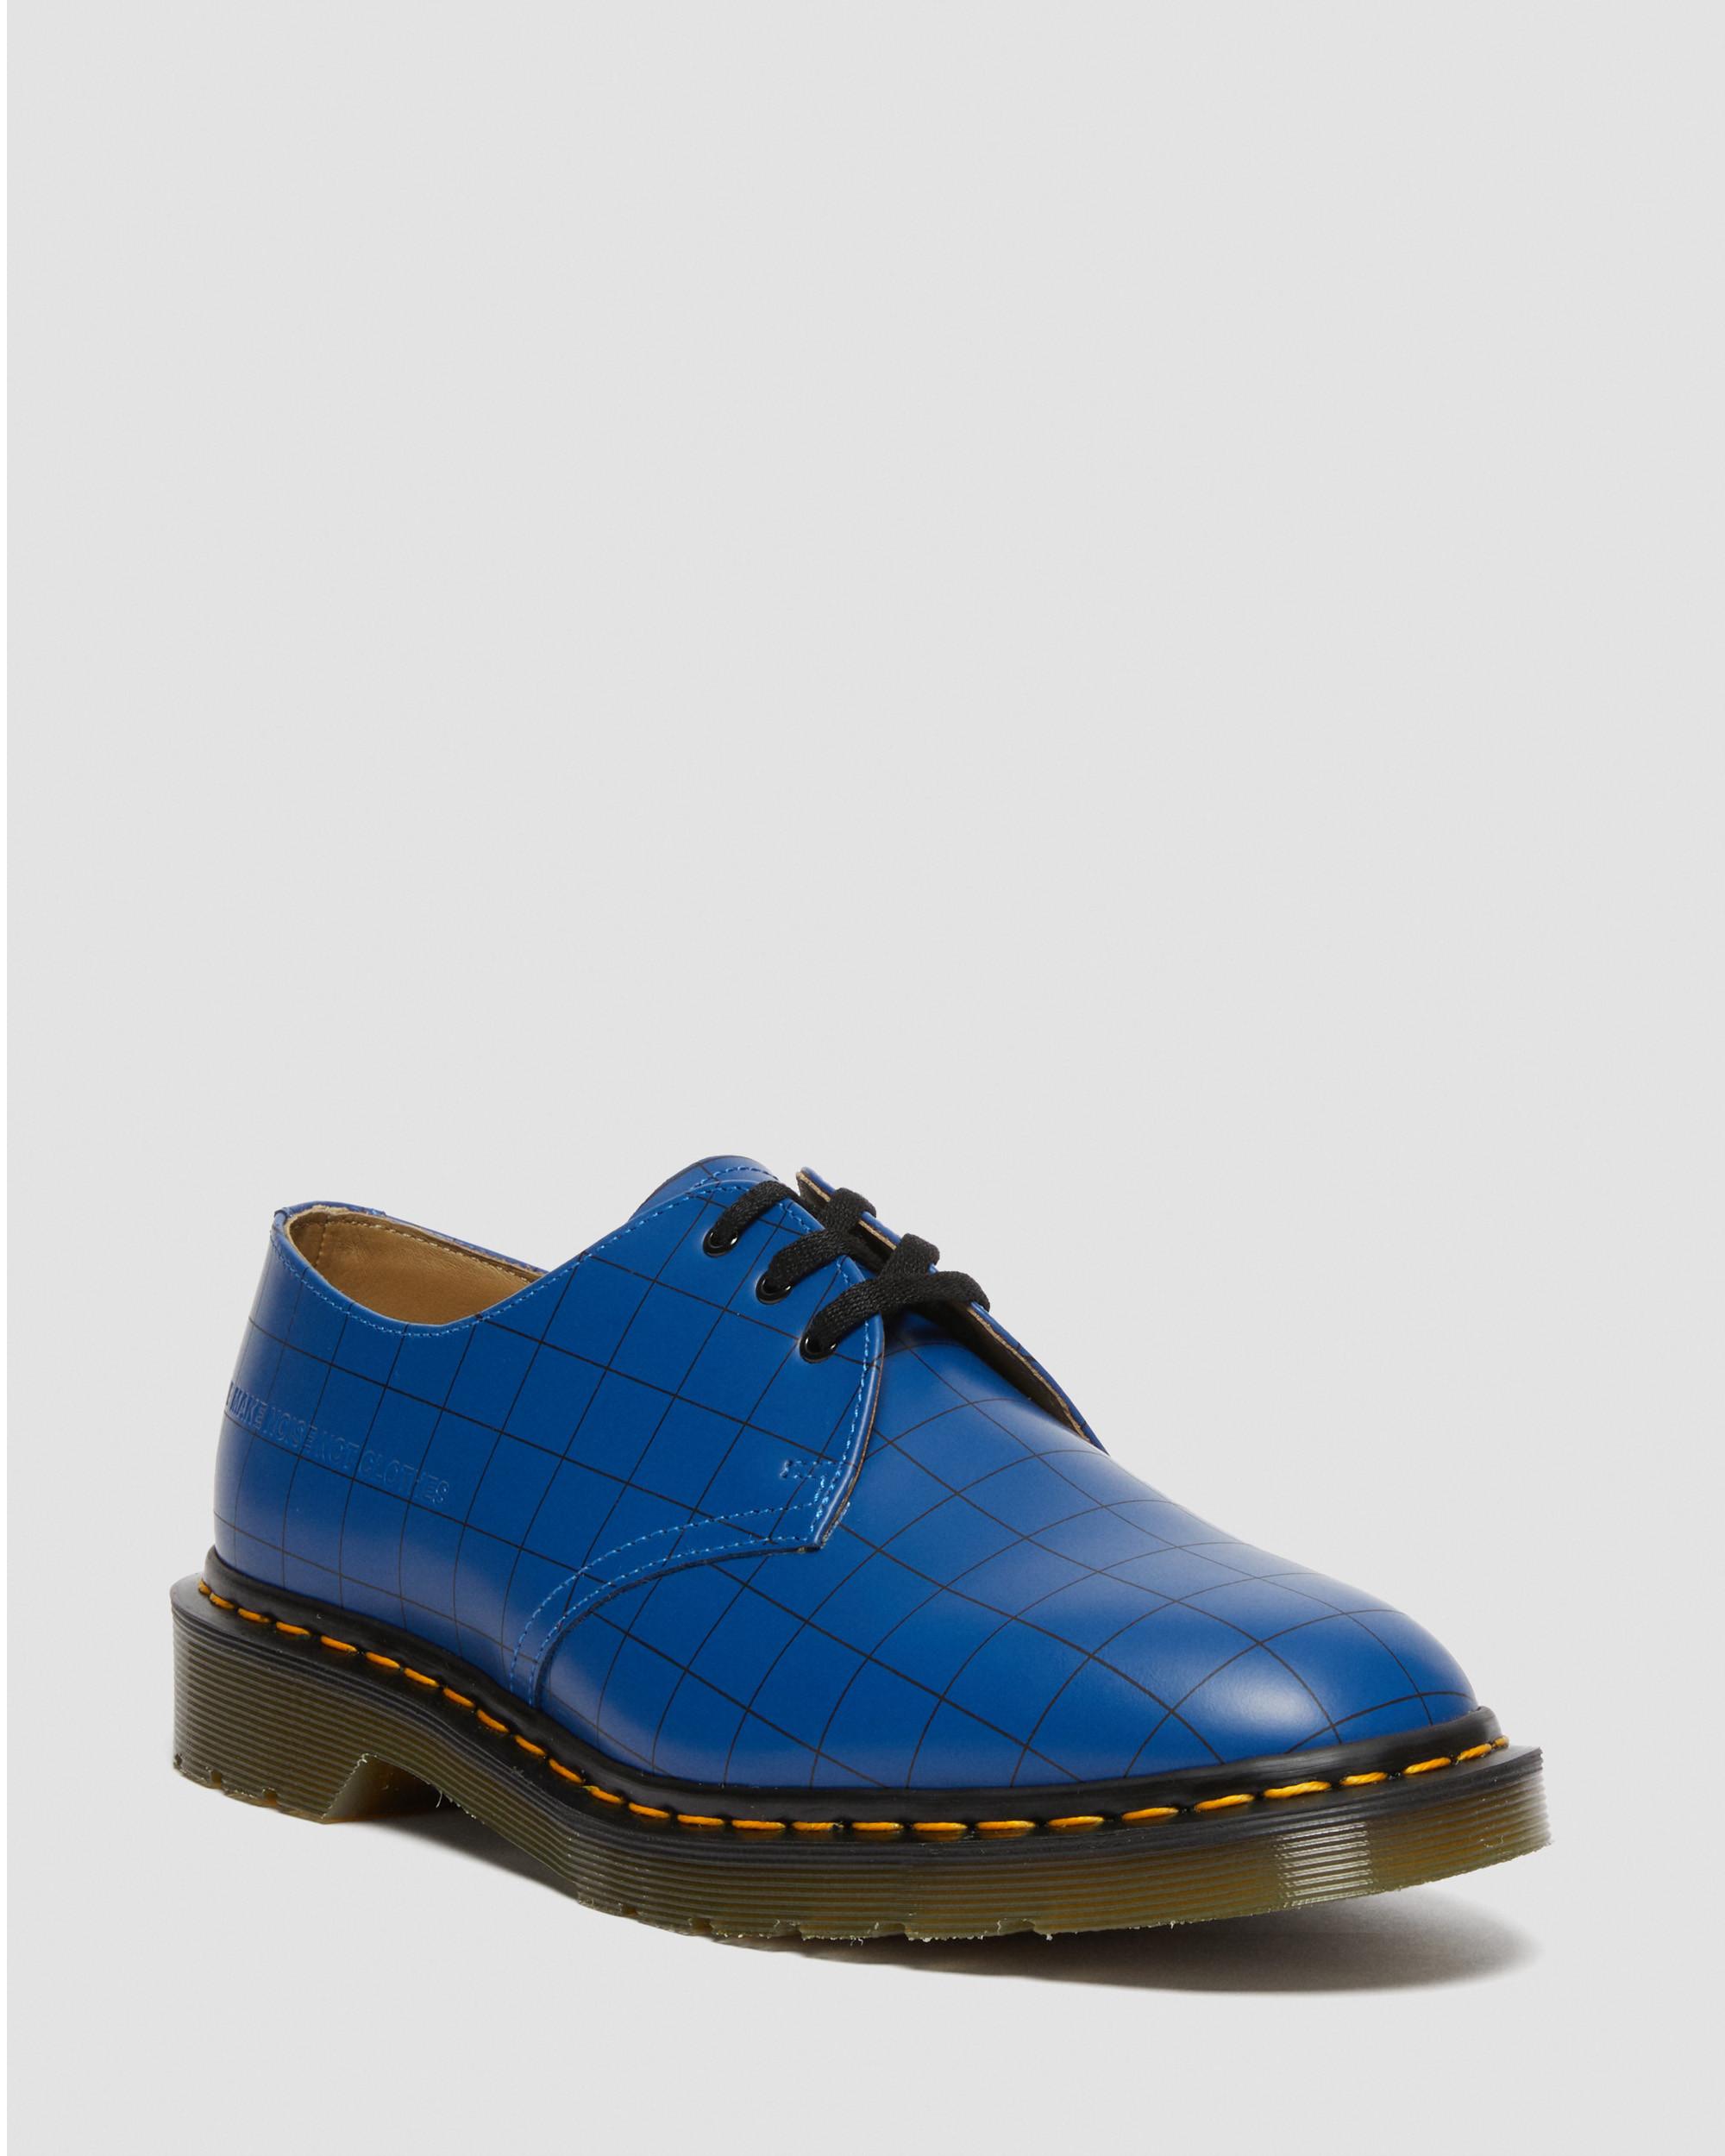 1461 Undercover Made in England Leather Oxford Shoes in Blue